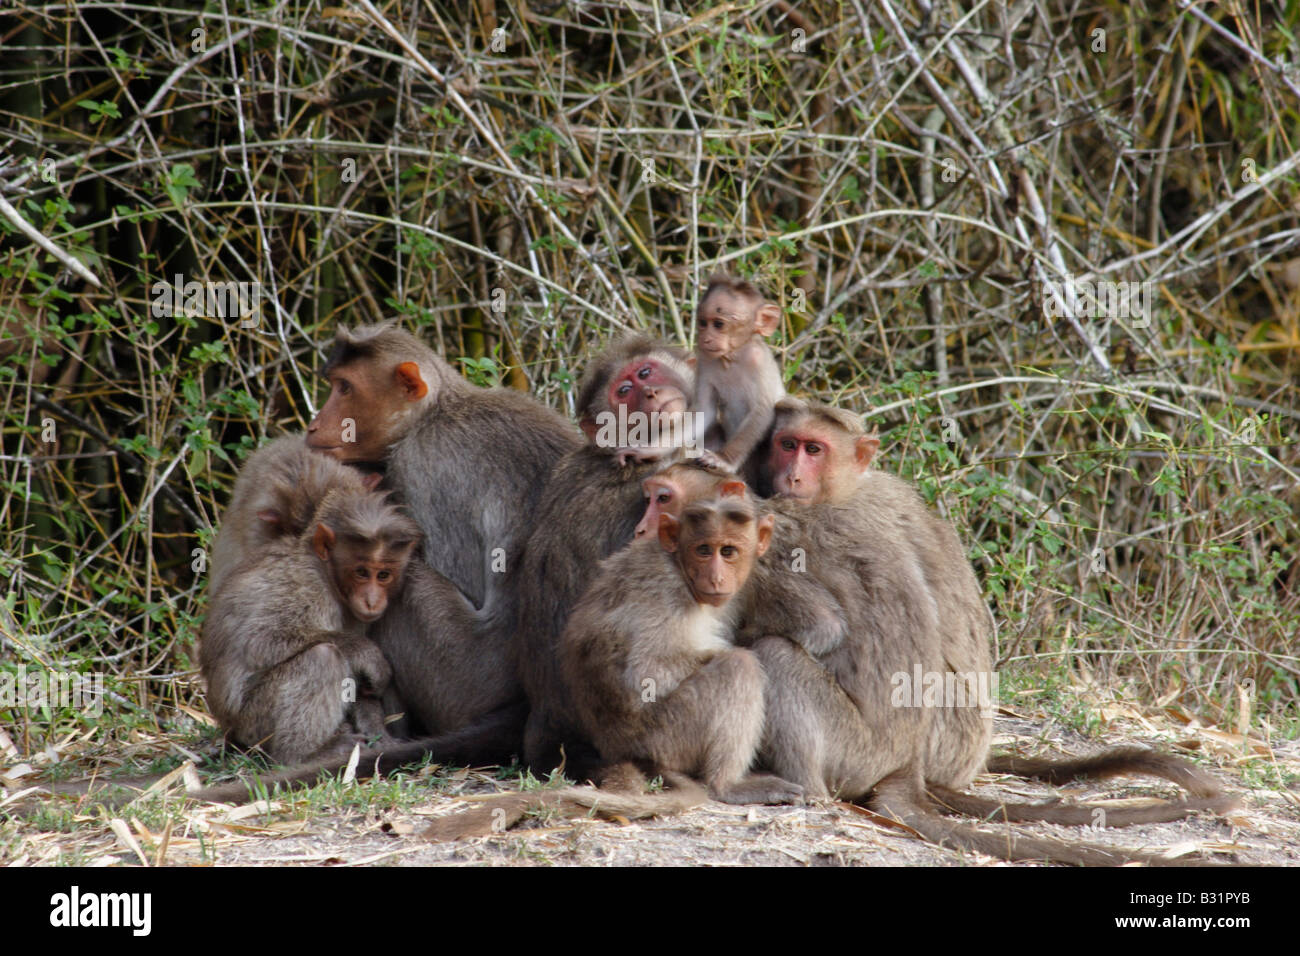 The Bonnet Macaque (Macaca radiata) is a macaque living in India. Stock Photo